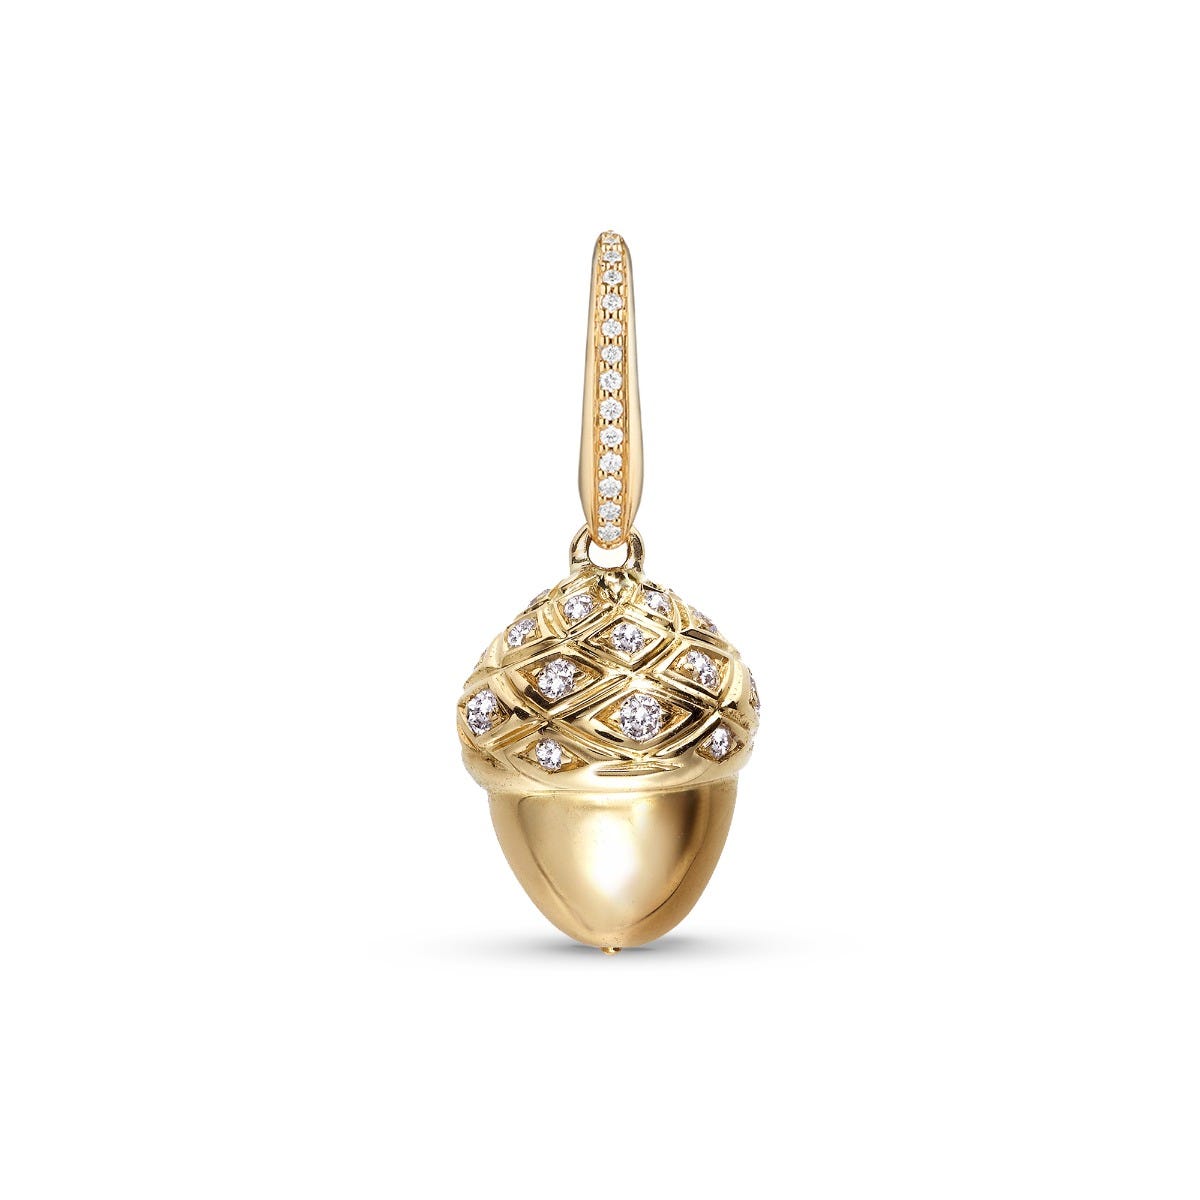 Woodland Acorn Charm in 18ct Yellow Gold with Diamonds